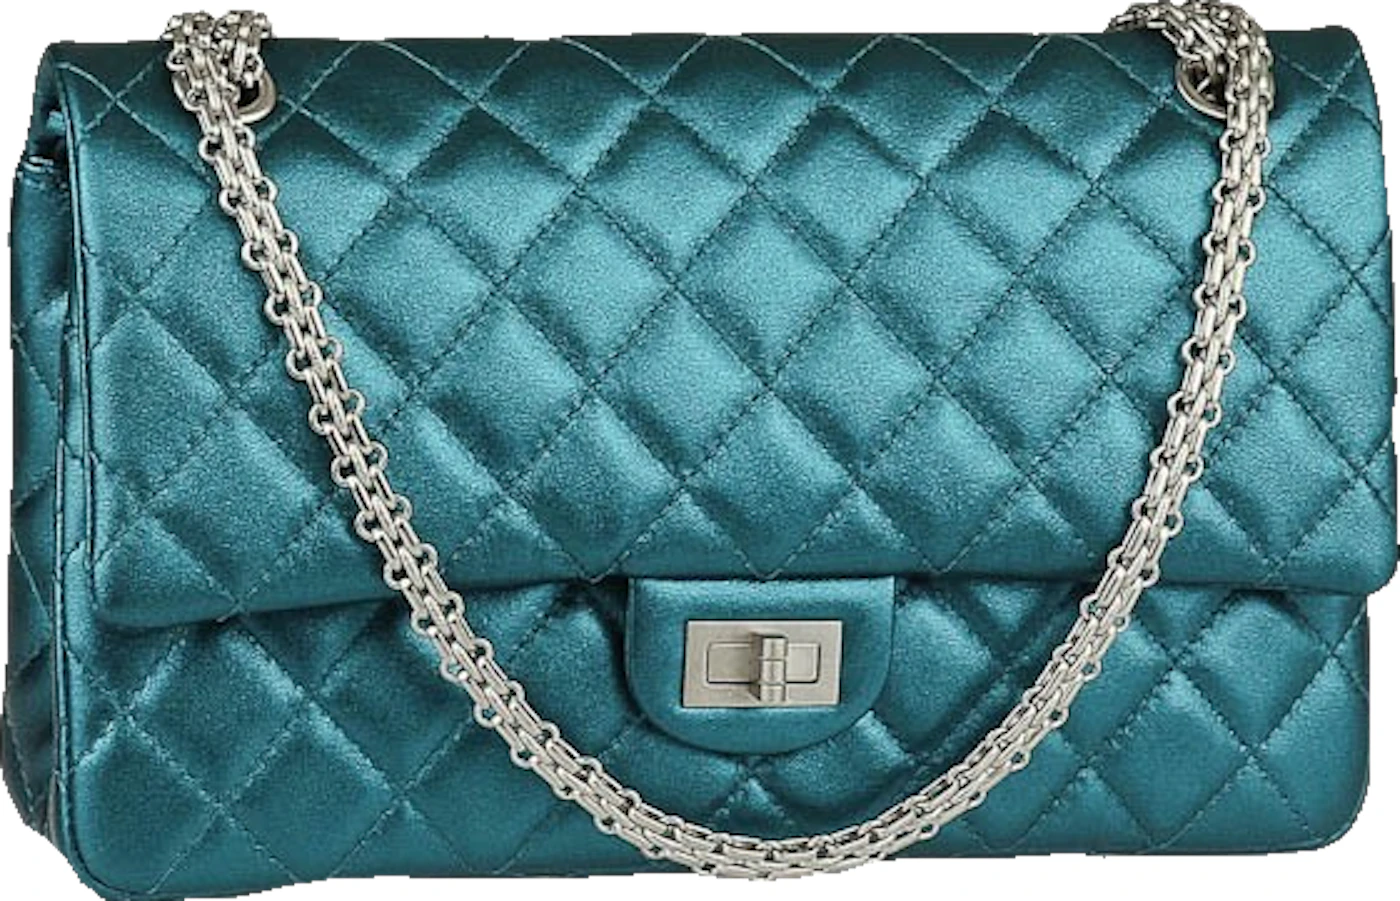 Chanel - Metallic Quilted Calfskin 2.55 Reissue 227 Double Flap